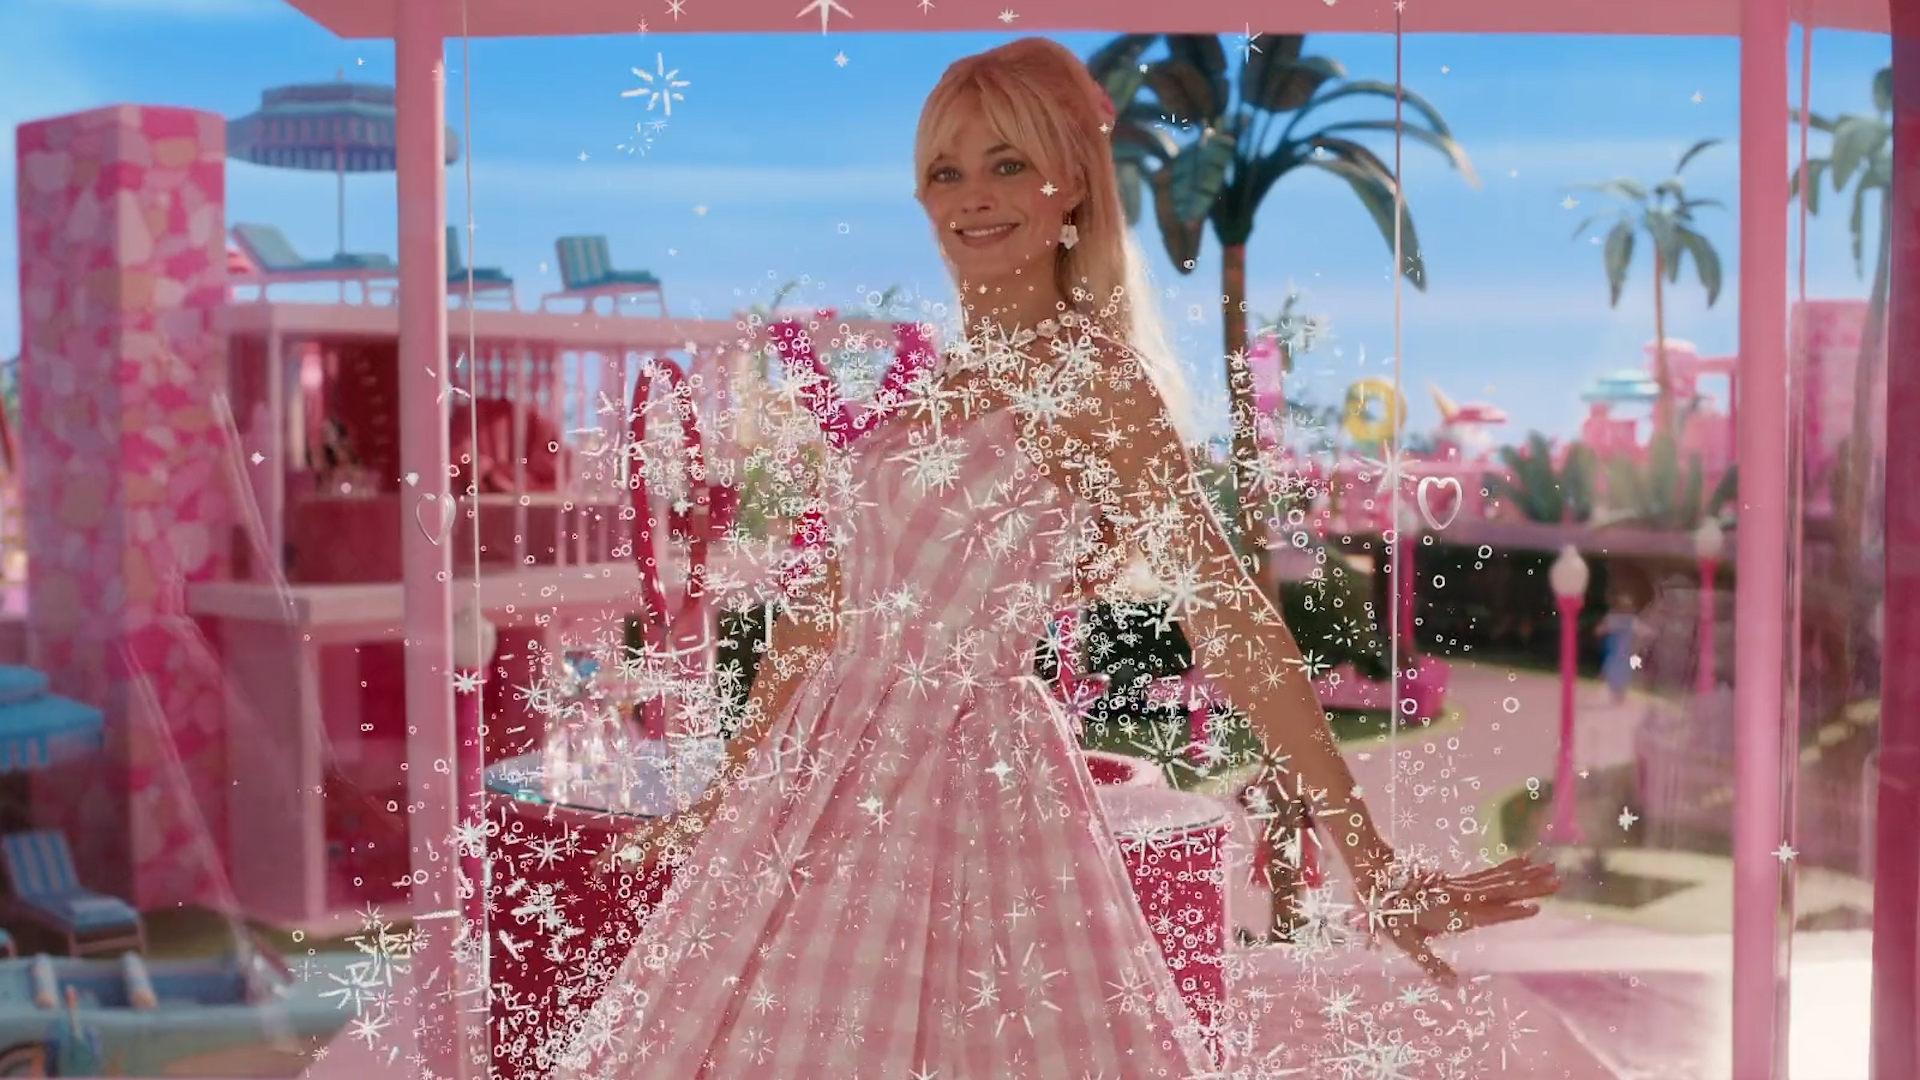 7 Barbie Collaborations To Make Your Own Dreamhouse